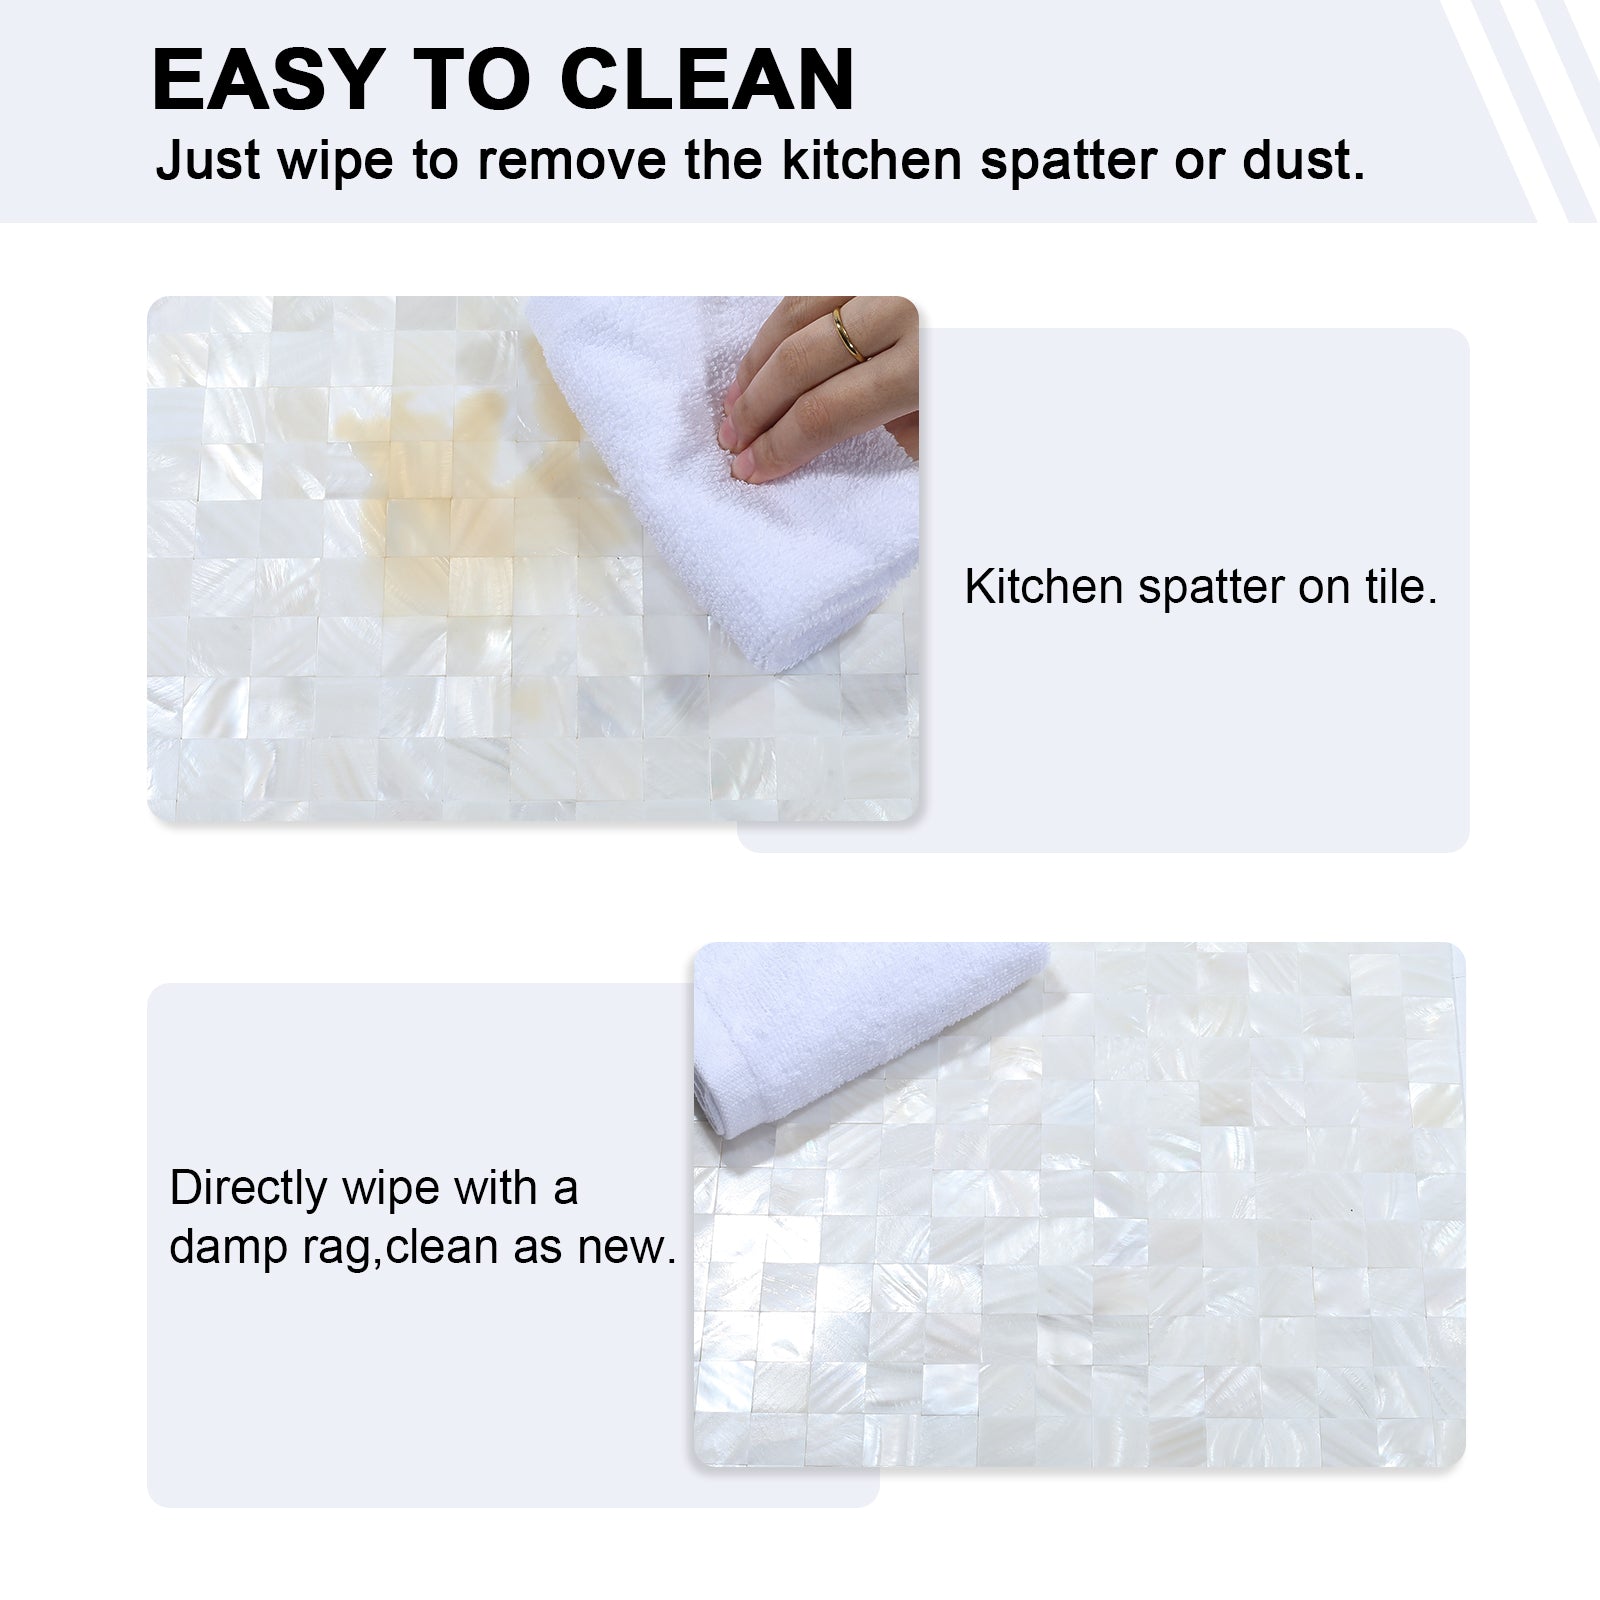 easy to clean